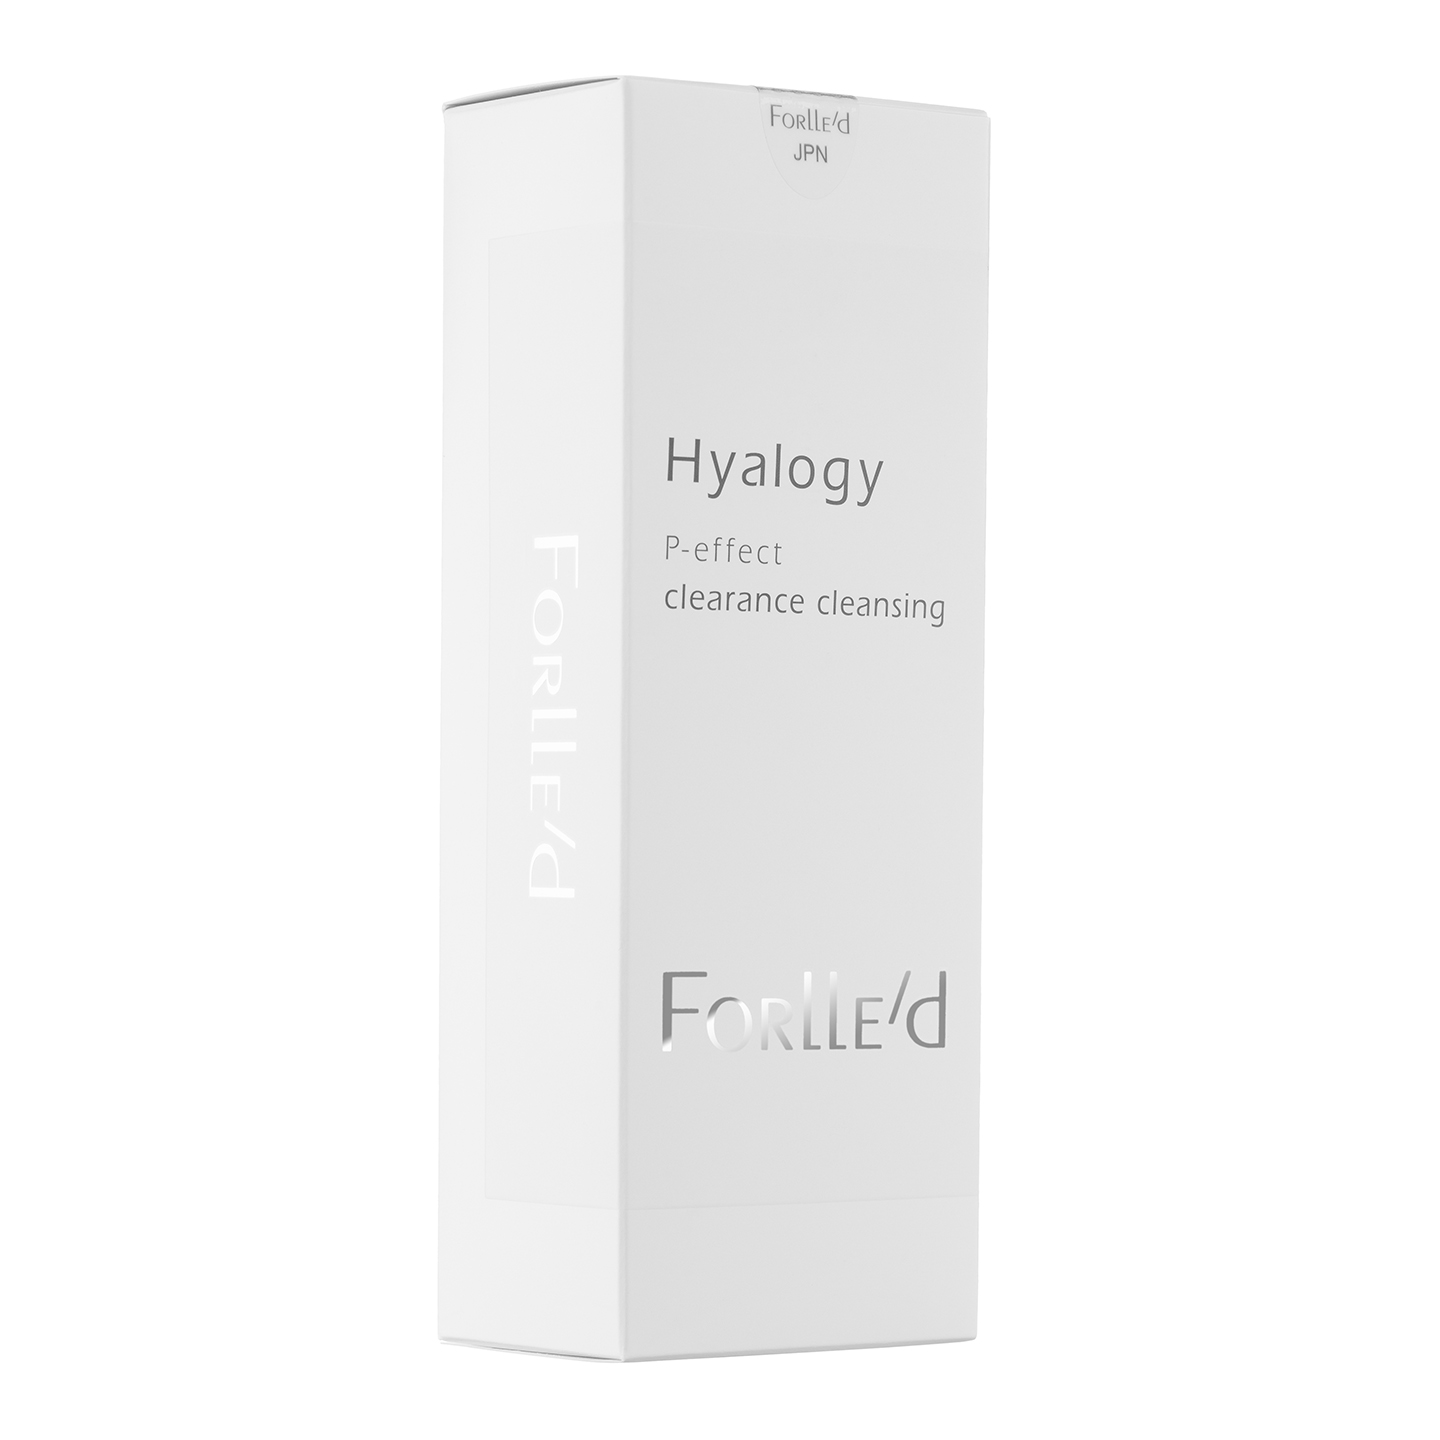 Hyalogy P-effect clearance cleansing DOM